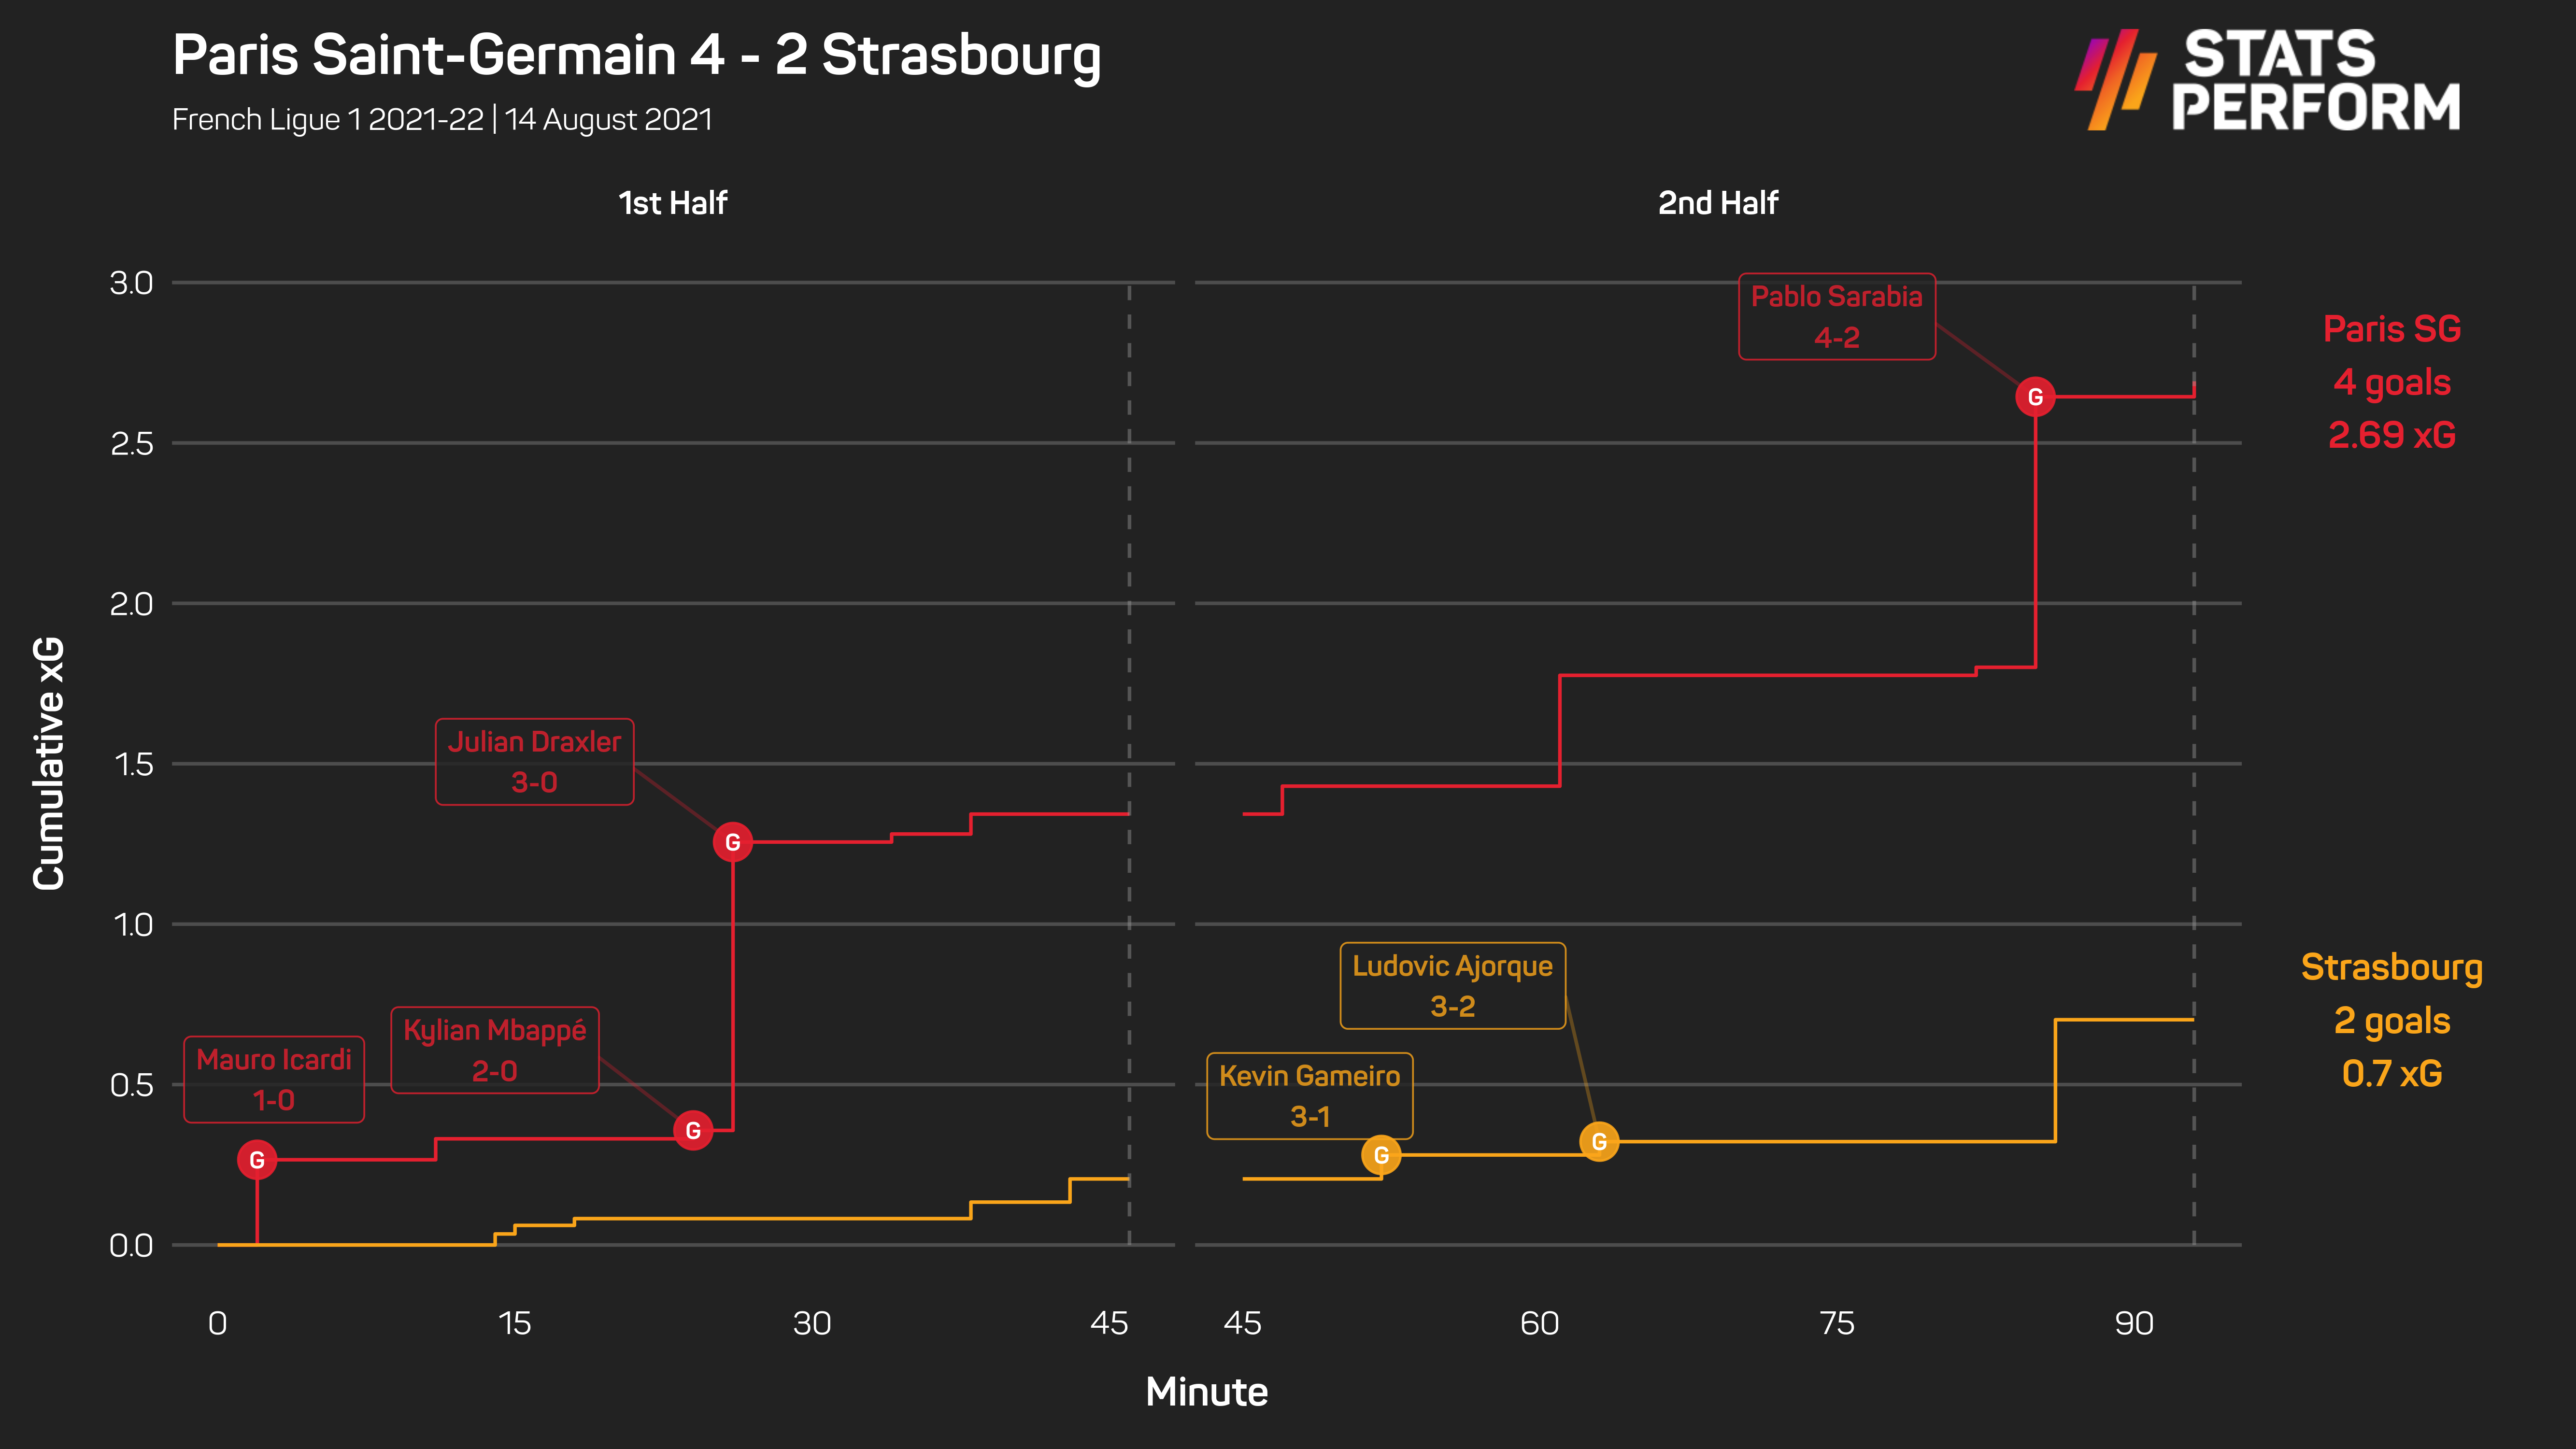 Strasbourg may have scored from shots with low xG value, but both situations displayed questionable defensive awareness